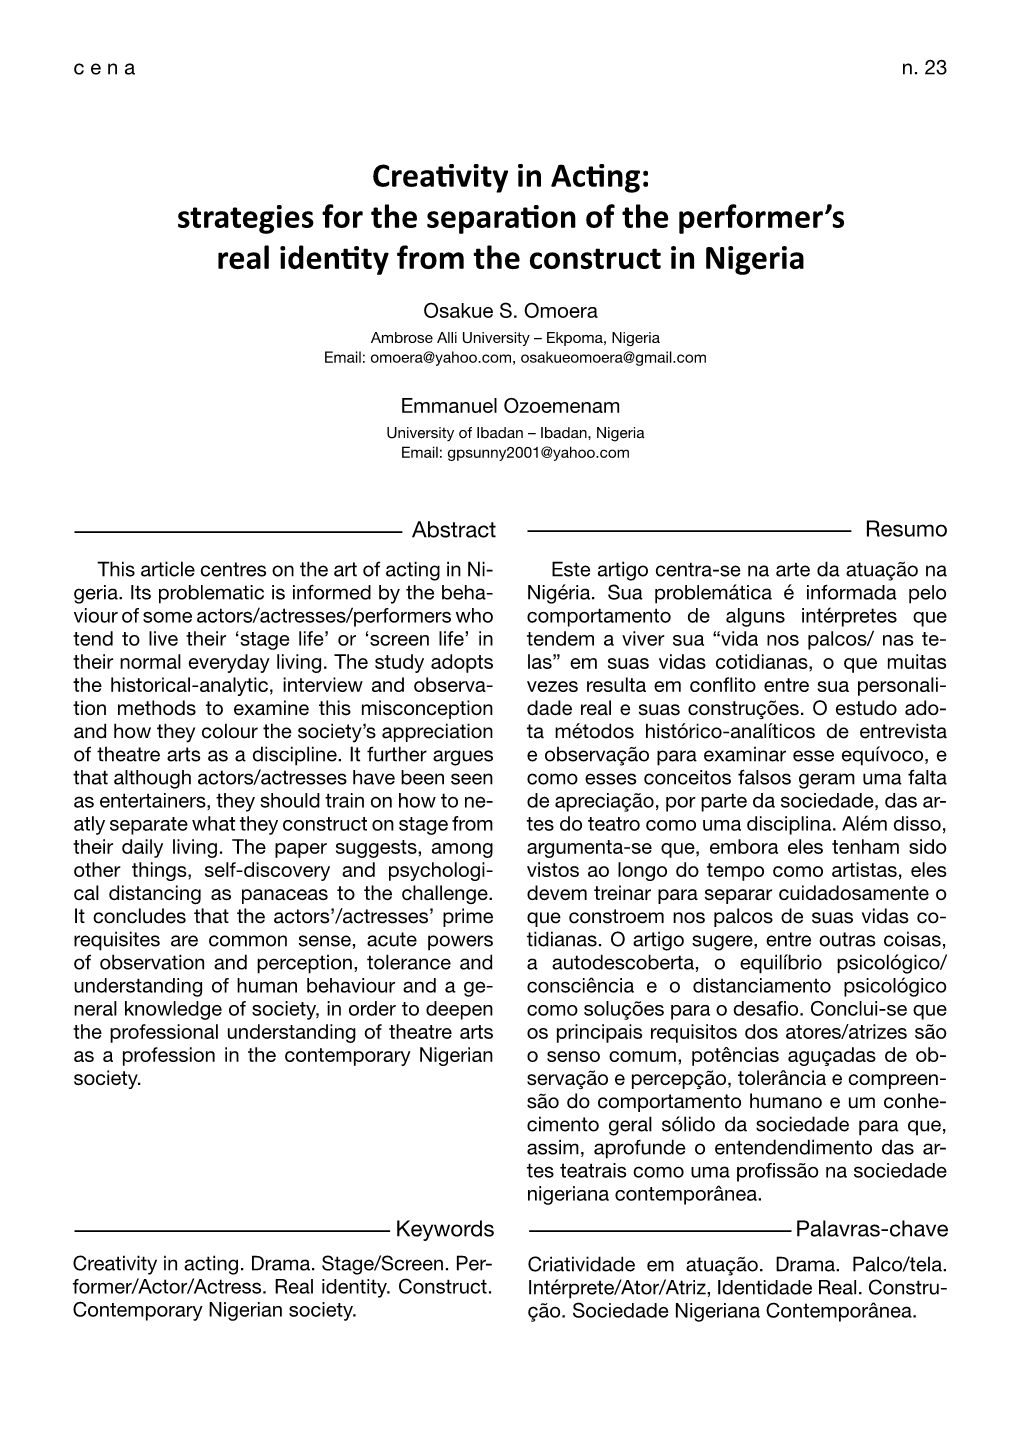 Creativity in Acting: Strategies for the Separation of the Performer’S Real Identity from the Construct in Nigeria